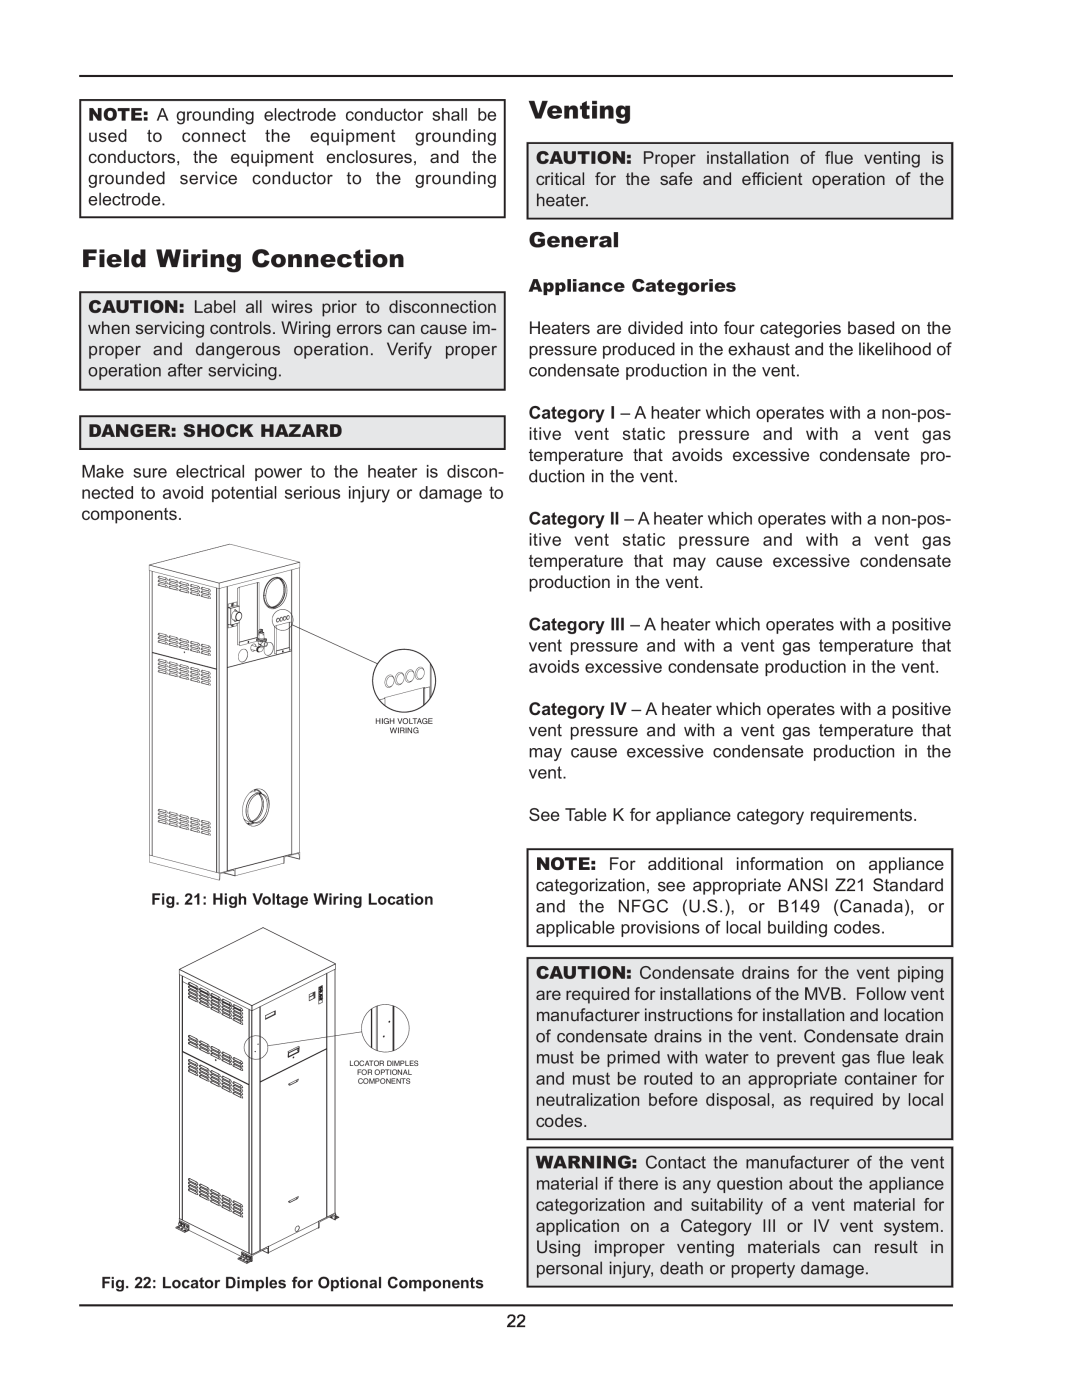 Raypak 5042004 operating instructions Field Wiring Connection, Venting, Danger: Shock Hazard, Appliance Categories 